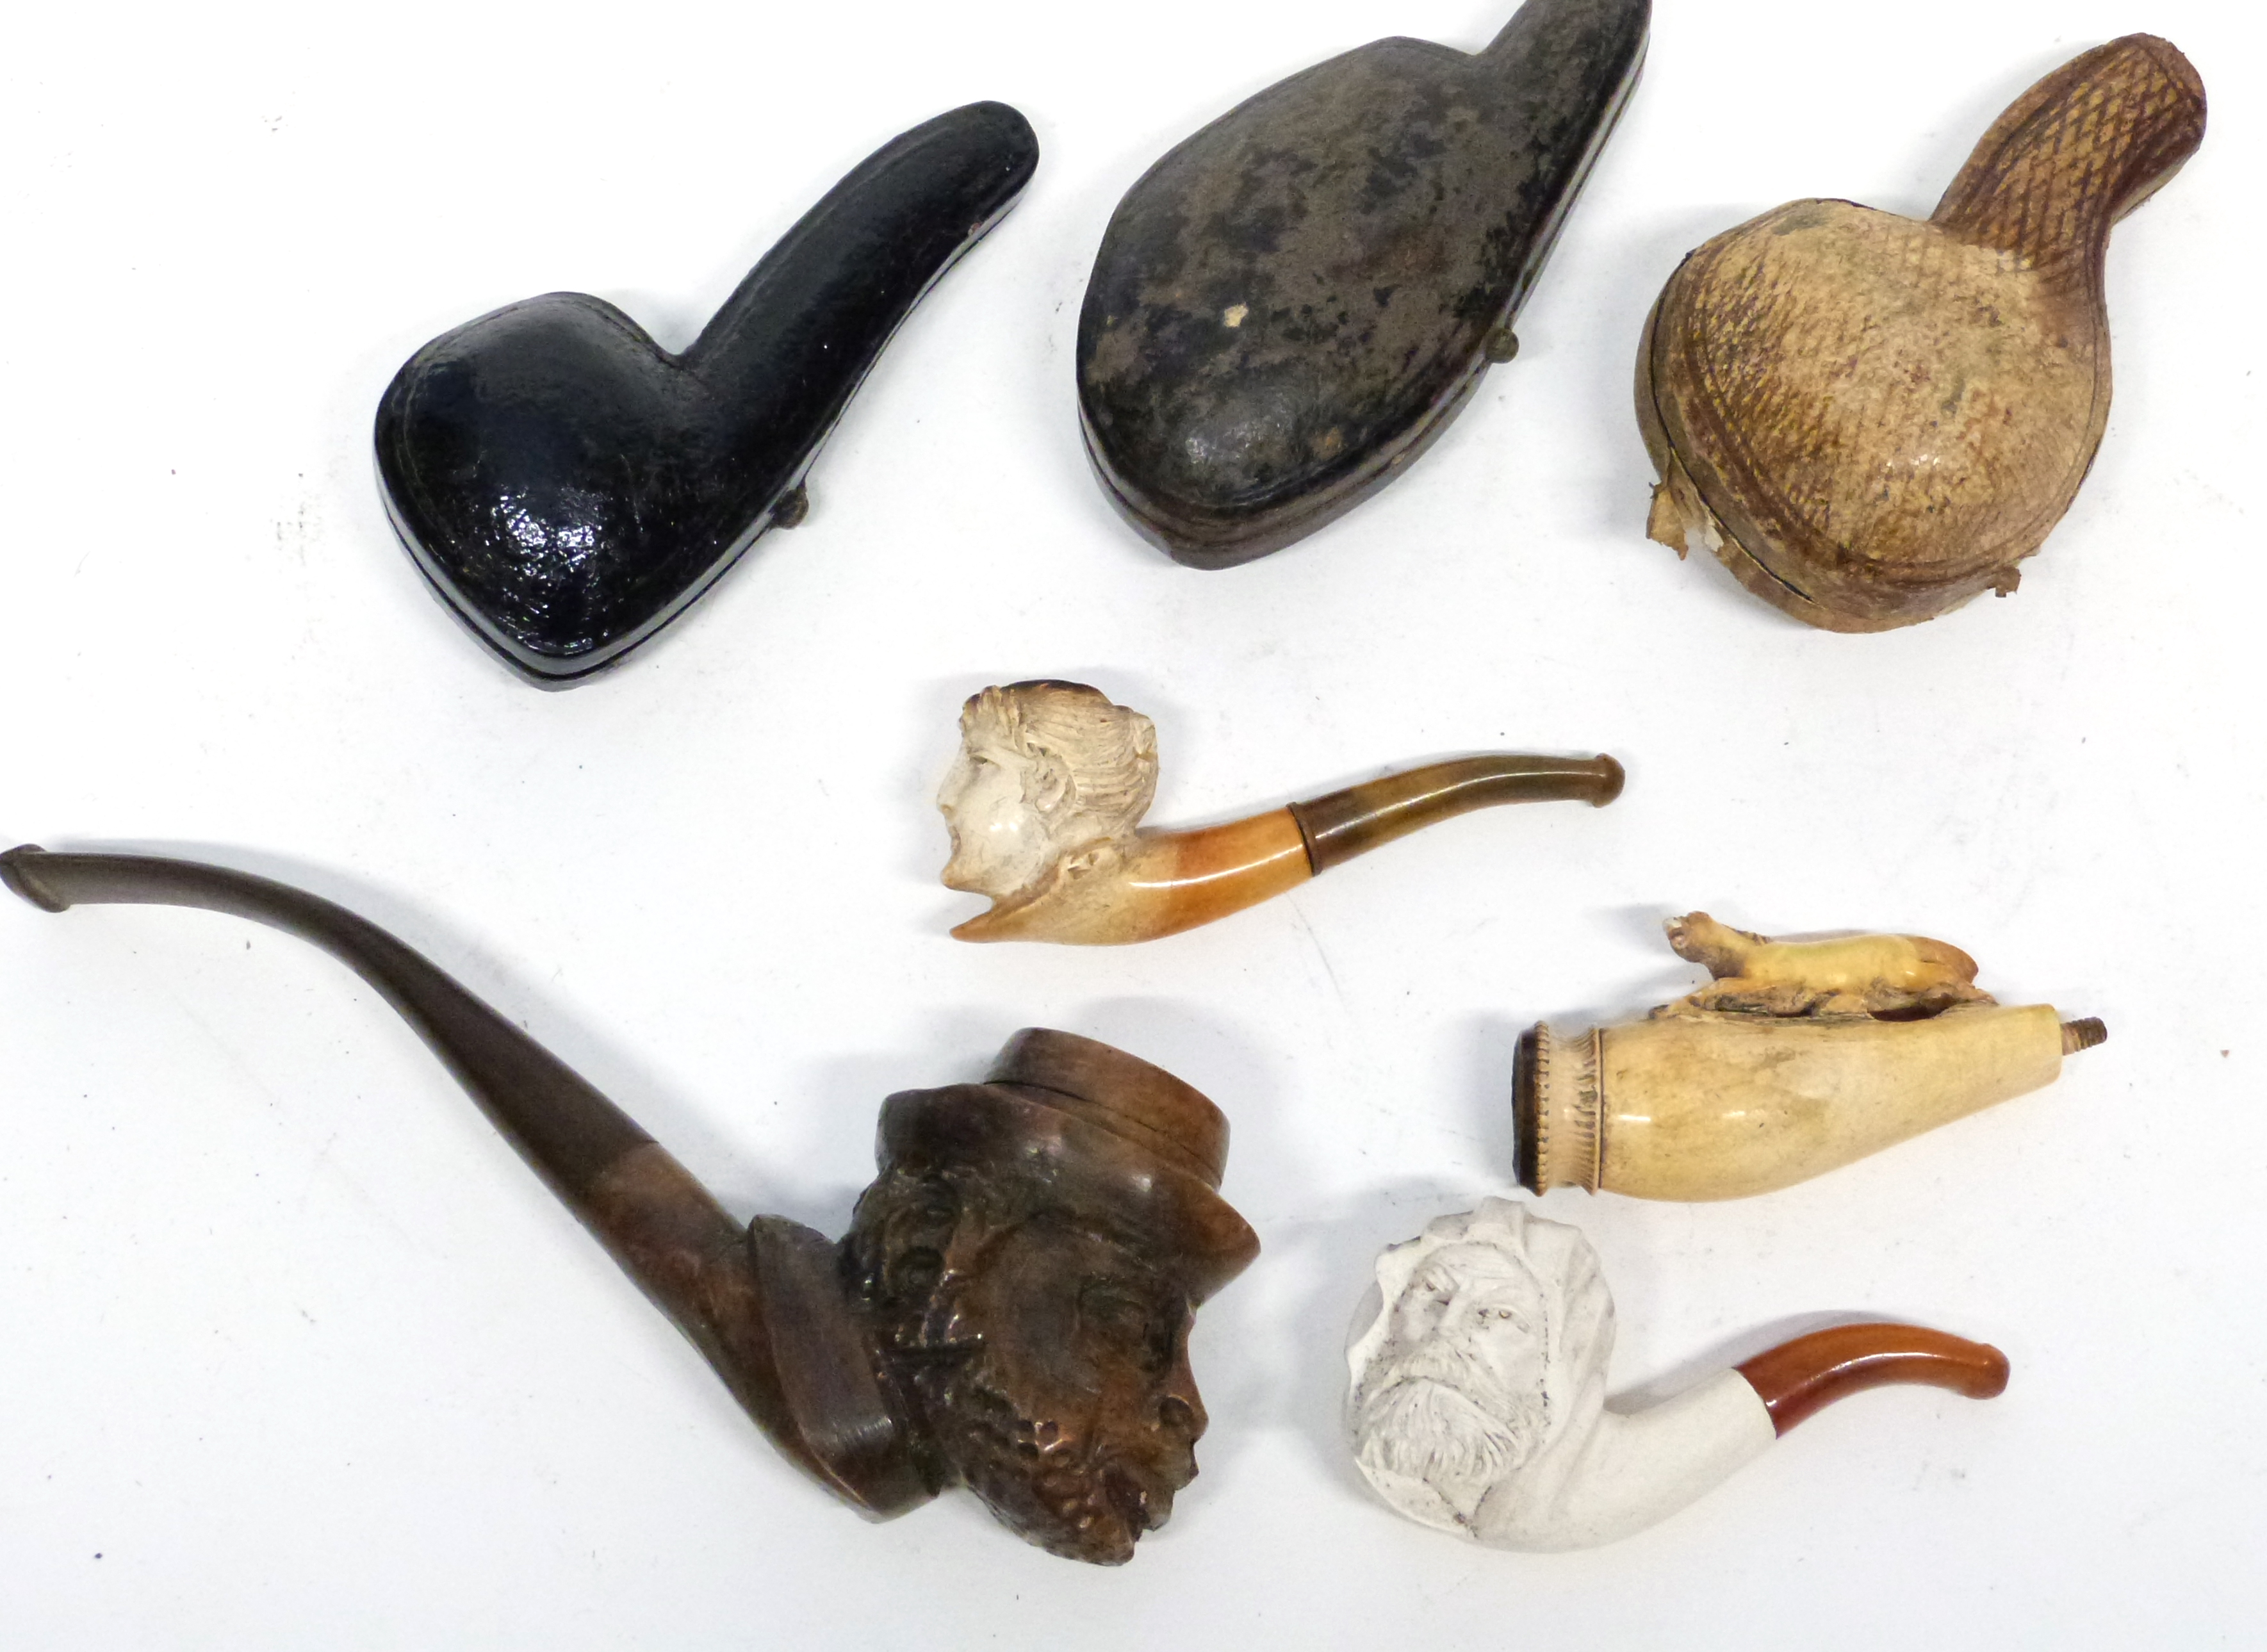 Small plastic case containing a Meerschaum type pipe and leather pipe cases (5)